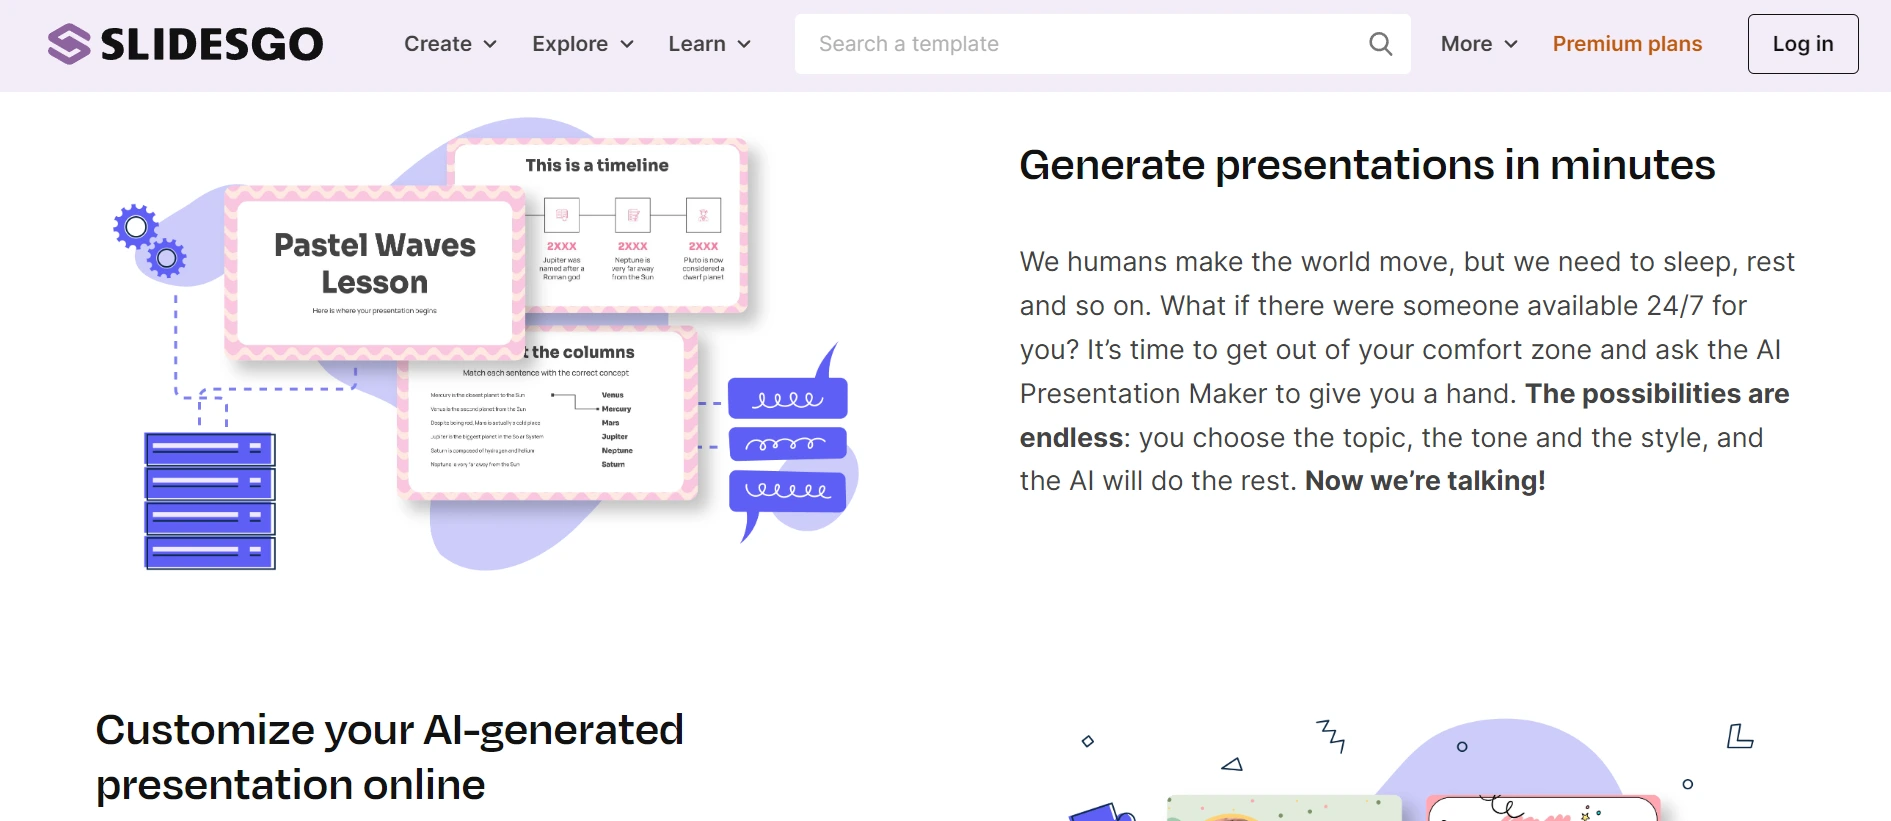 Slides Go AI is used to build interactive presentations using ai driven tech